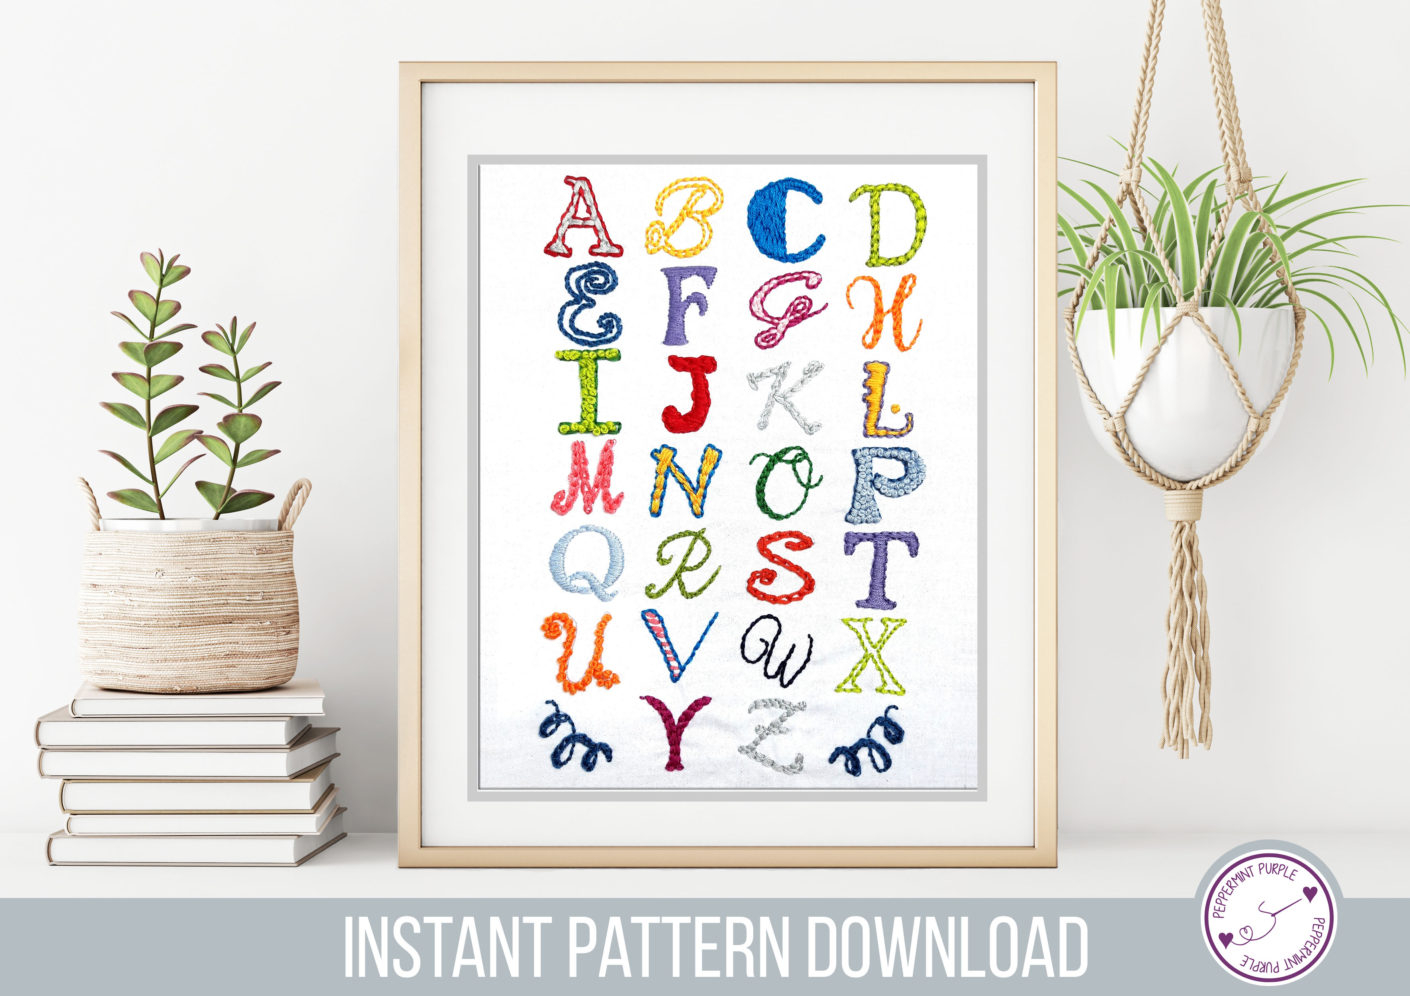 Embroidery Sampler Patterns Hand Embroidery Alphabet Sampler Pattern Peppermint Purple